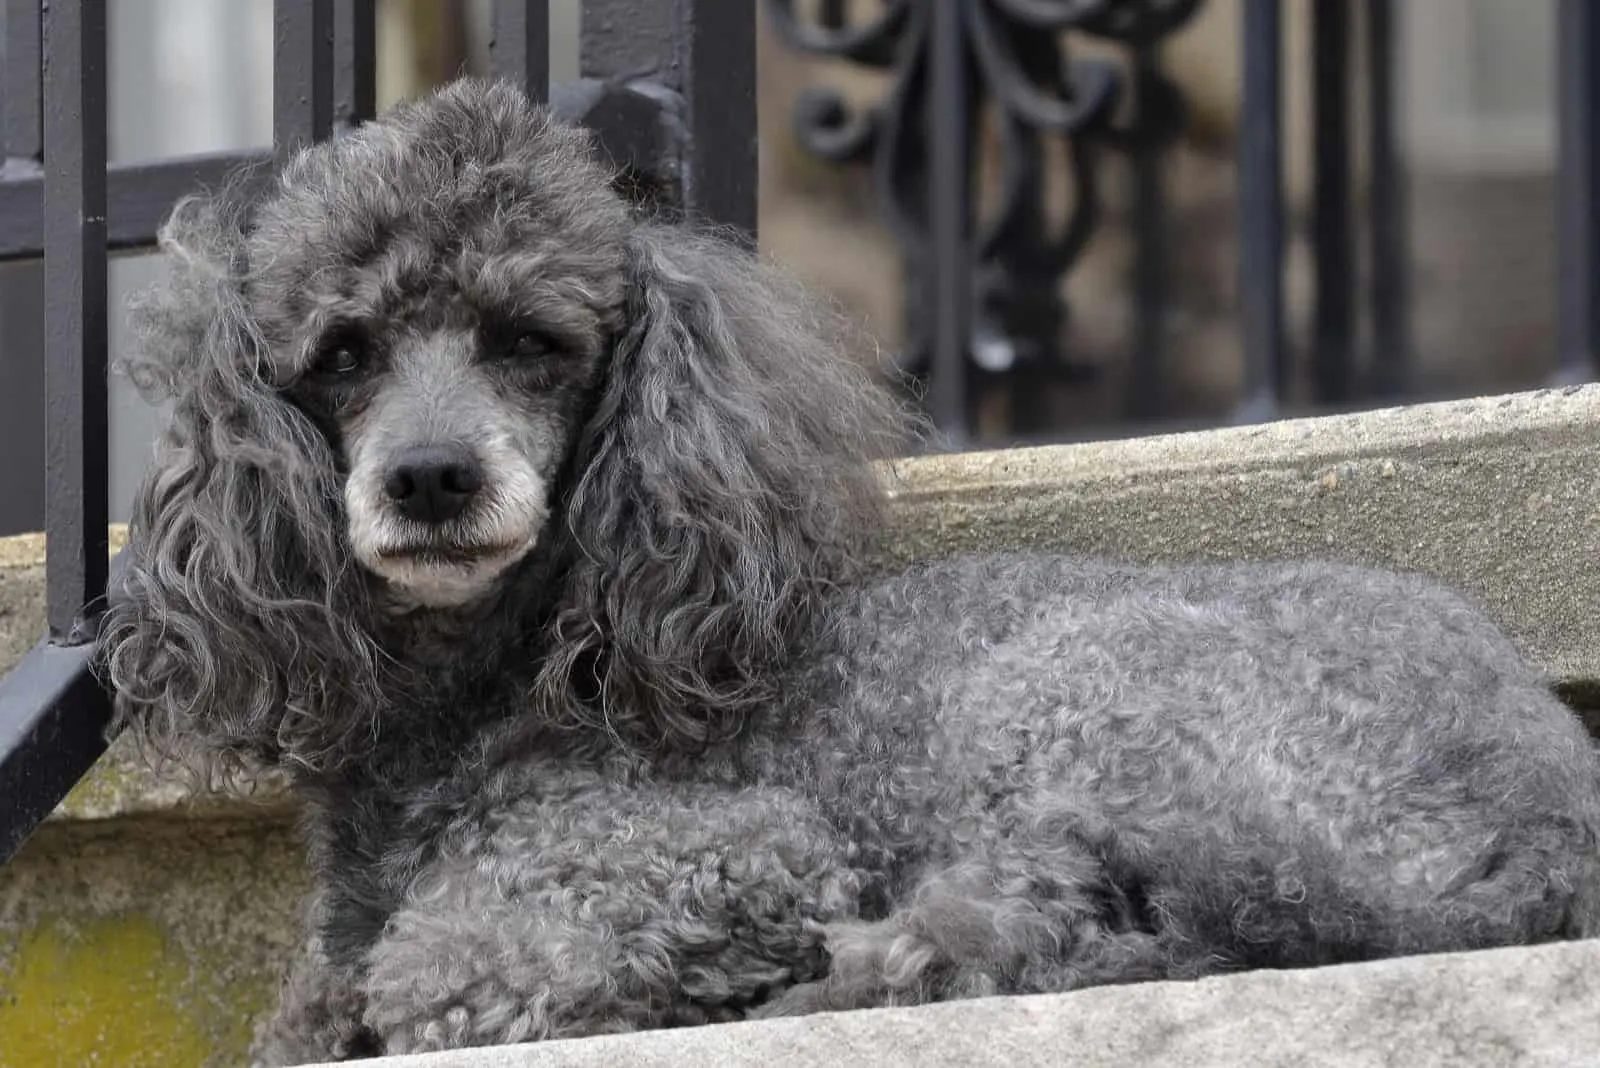 What's so special about the Gray Poodle that Everyone Loves?